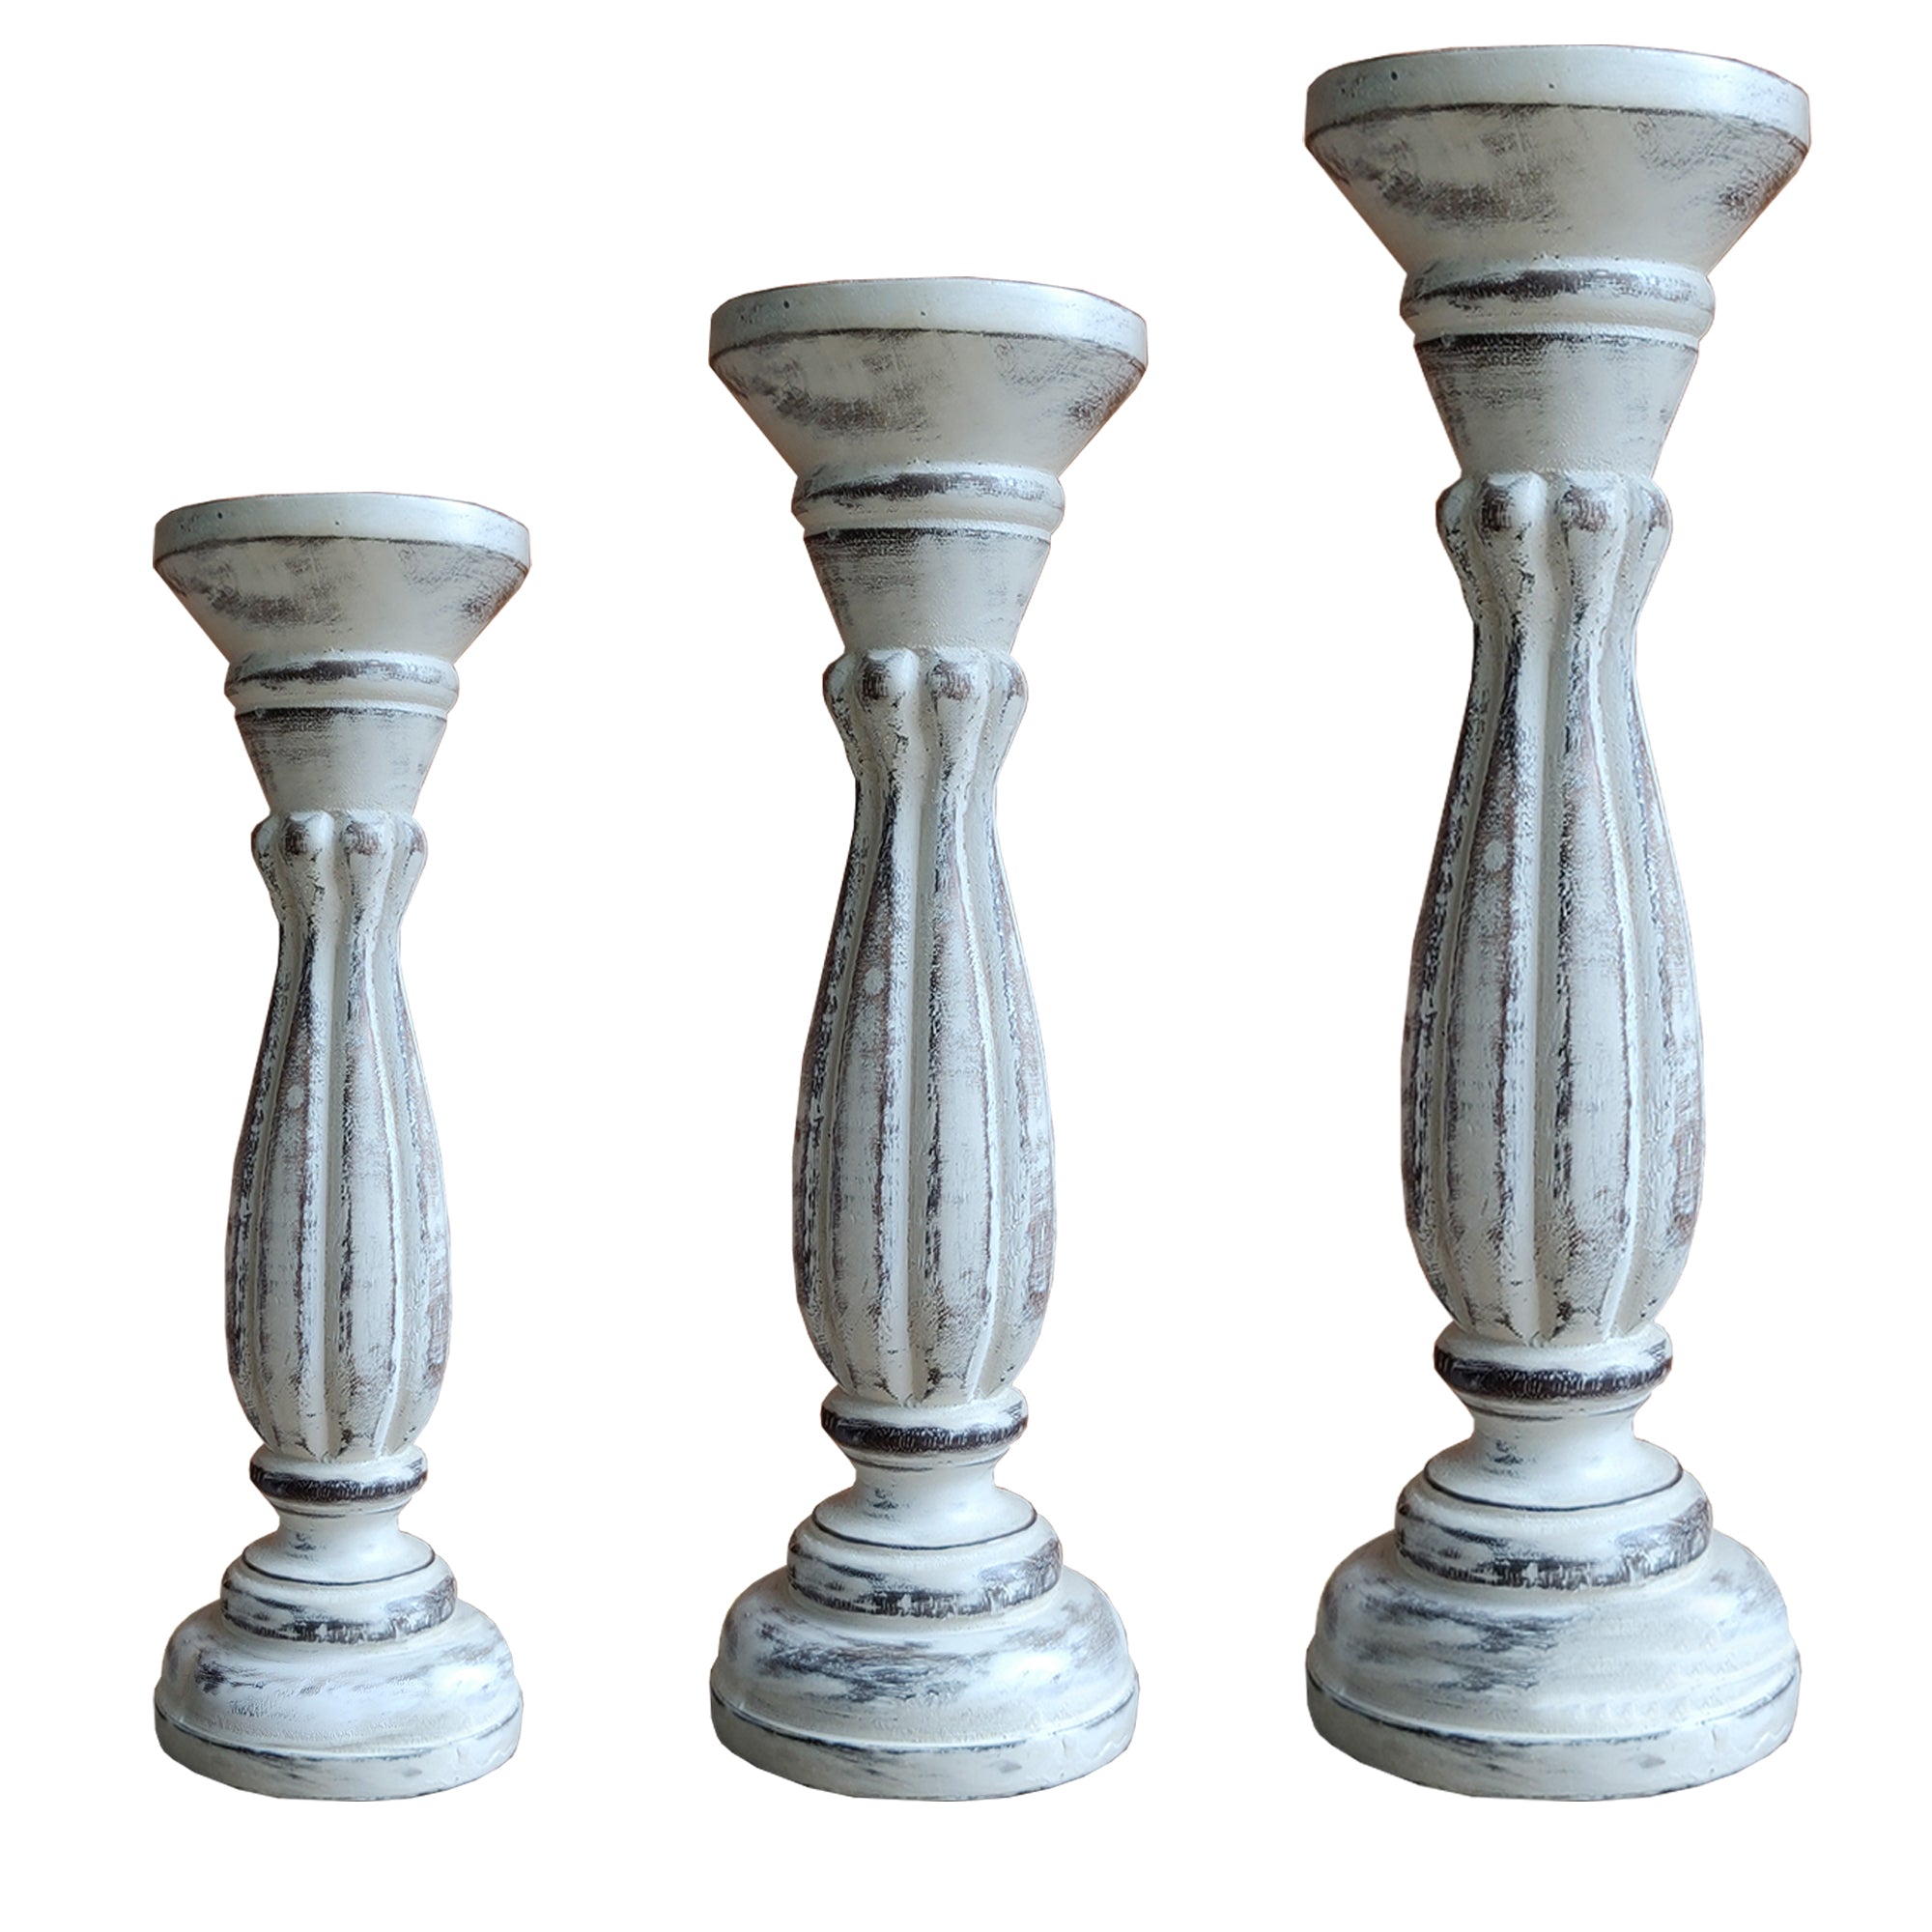 Handmade Wooden Candle Holder with Pillar Base Support - Distressed White (Set of 3)